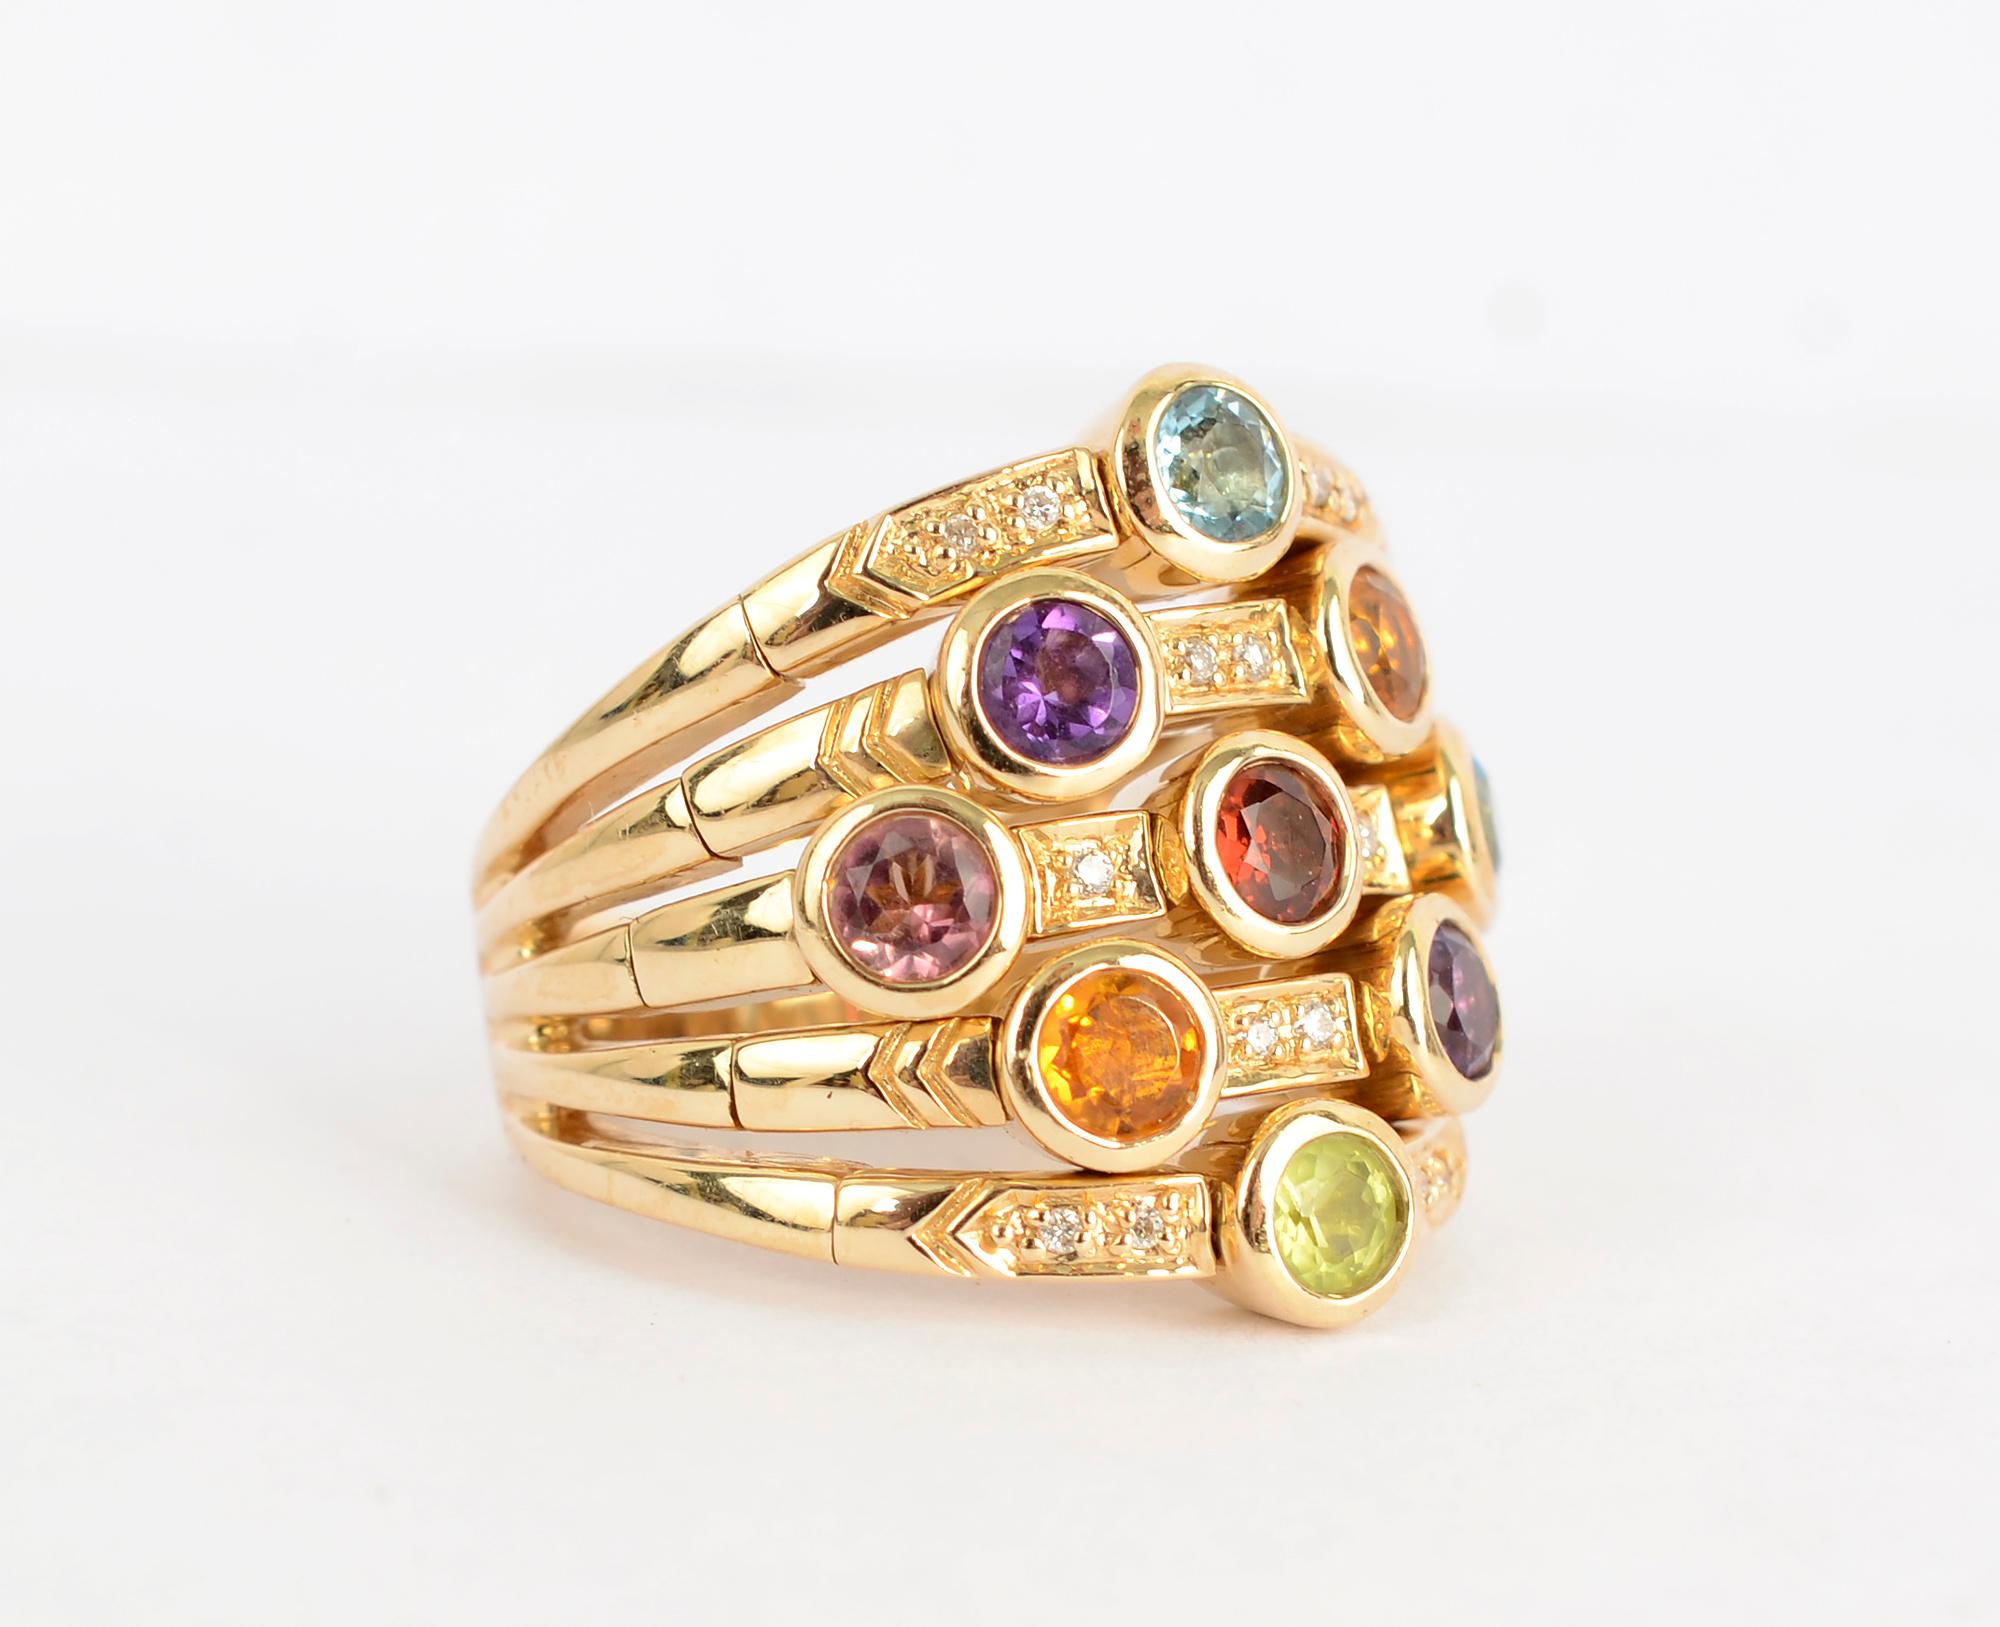 Fashionable ring by Sonia B with five bands that merge as one on the shank. The ring has nine stones that include: amethyst; citrine; peridot; blue topaz and tourmaline. Between the stones are diamonds for some added sparkle. The ring is size 6 3/4